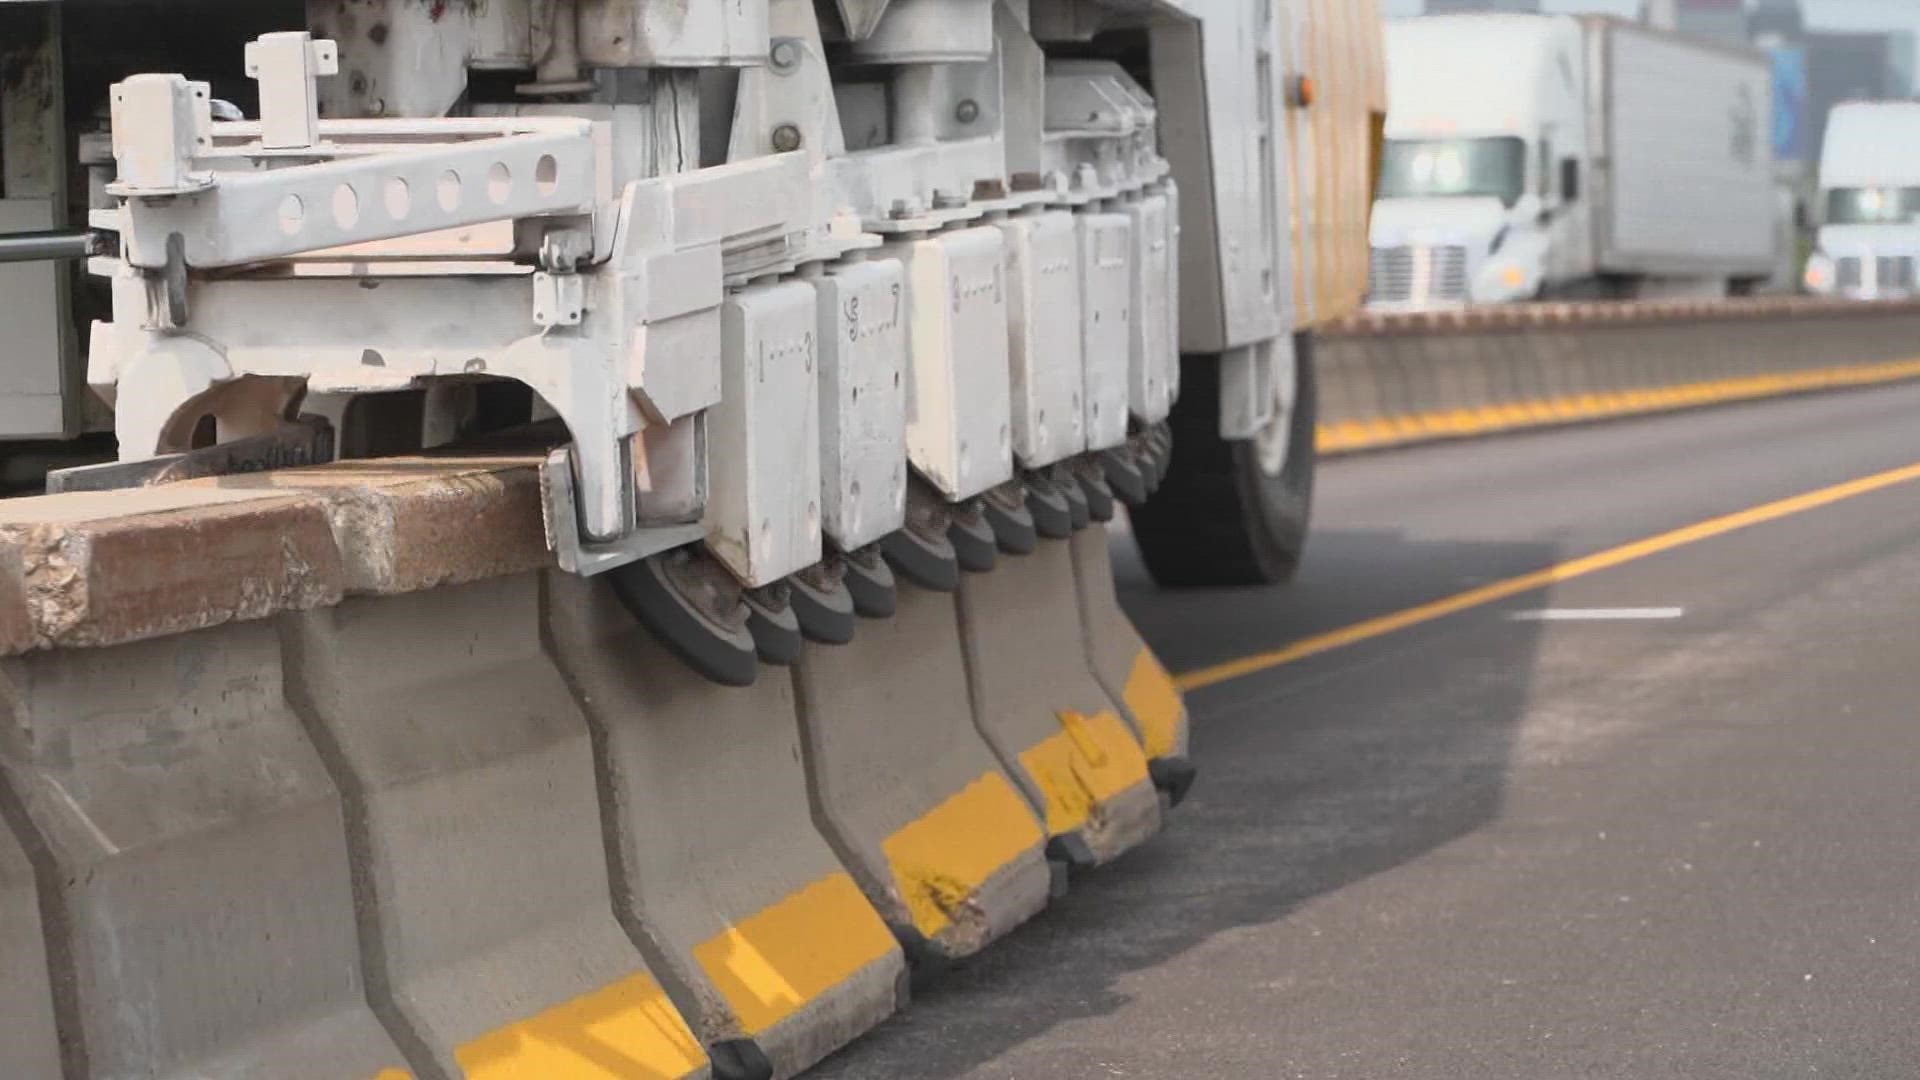 Twice a day, the zipper machine moves 8.5 miles of barrier to create an additional lane for those of you traveling in and out of Dallas 5 days a week.